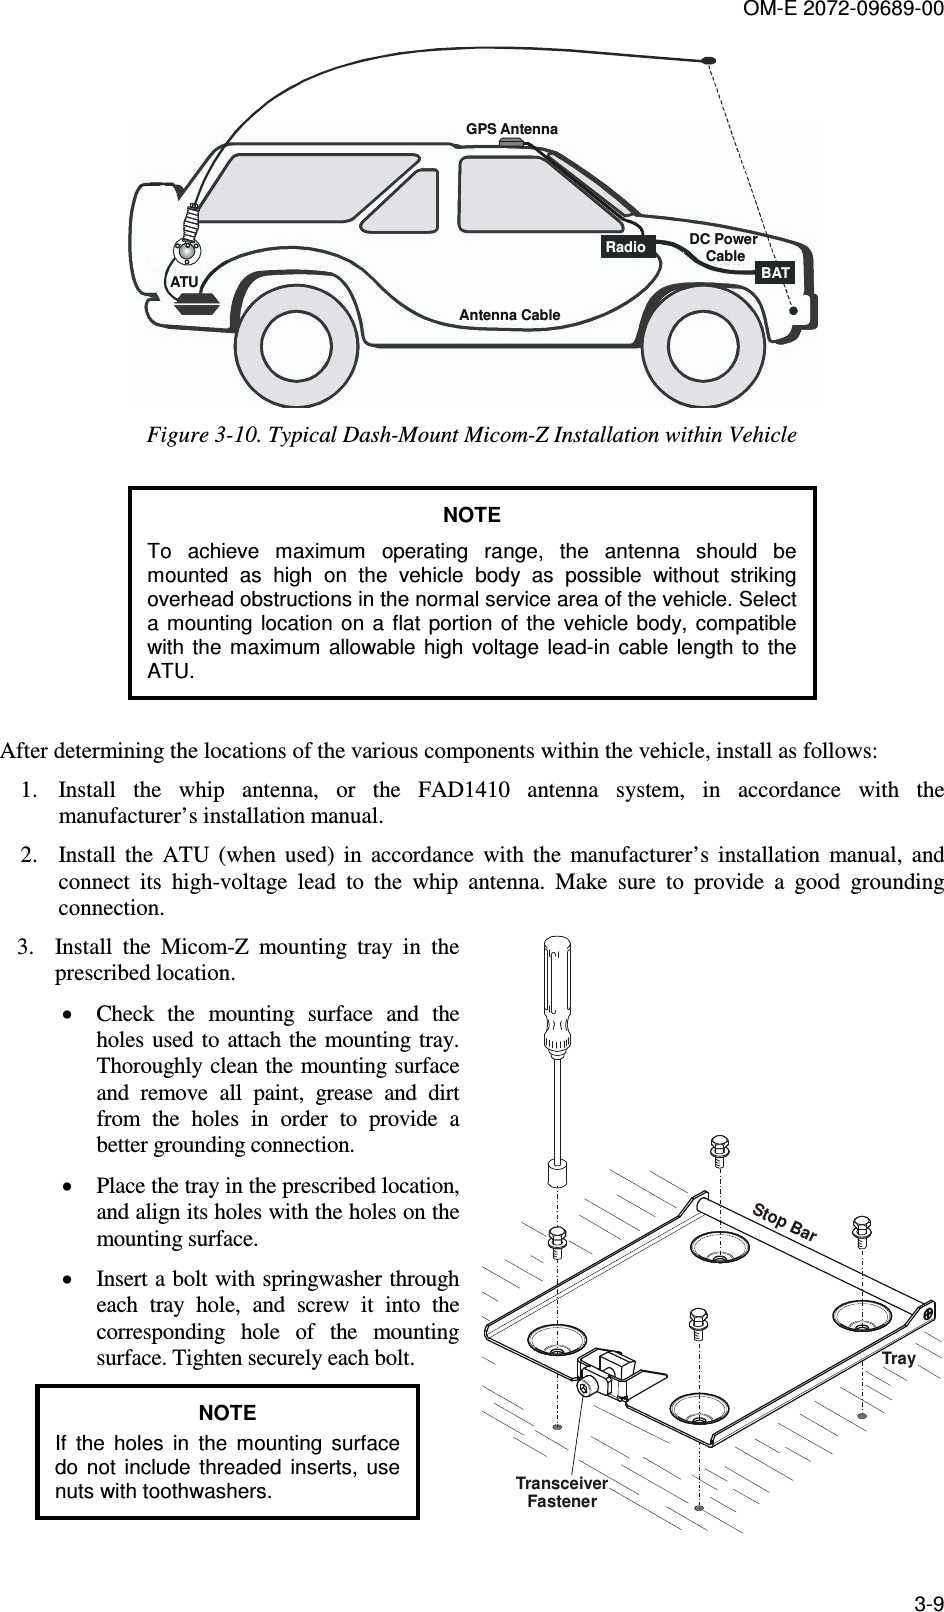 OM-E 2072-09689-00 3-9  RadioATUAntenna CableDC Power CableBATGPS Antenna Figure  3-10. Typical Dash-Mount Micom-Z Installation within Vehicle  NOTE To  achieve  maximum  operating  range,  the  antenna  should  be mounted  as  high  on  the  vehicle  body  as  possible  without  striking overhead obstructions in the normal service area of the vehicle. Select a mounting  location  on a flat  portion  of the vehicle  body,  compatible with  the  maximum  allowable  high  voltage  lead-in  cable  length  to  the ATU.  After determining the locations of the various components within the vehicle, install as follows: 1. Install  the  whip  antenna,  or  the  FAD1410  antenna  system,  in  accordance  with  the manufacturer’s installation manual. 2. Install  the  ATU  (when  used)  in  accordance  with  the  manufacturer’s  installation  manual,  and connect  its  high-voltage  lead  to  the  whip  antenna.  Make  sure  to  provide  a  good  grounding connection. 3. Install  the  Micom-Z  mounting  tray  in  the prescribed location. • Check  the  mounting  surface  and  the holes used  to attach the  mounting  tray. Thoroughly clean the mounting surface and  remove  all  paint,  grease  and  dirt from  the  holes  in  order  to  provide  a better grounding connection. • Place the tray in the prescribed location, and align its holes with the holes on the mounting surface. • Insert a bolt with springwasher through each  tray  hole,  and  screw  it  into  the corresponding  hole  of  the  mounting surface. Tighten securely each bolt. NOTE If  the  holes  in  the  mounting  surface do  not  include  threaded  inserts,  use nuts with toothwashers.  TrayStop BarTransceiverFastener 